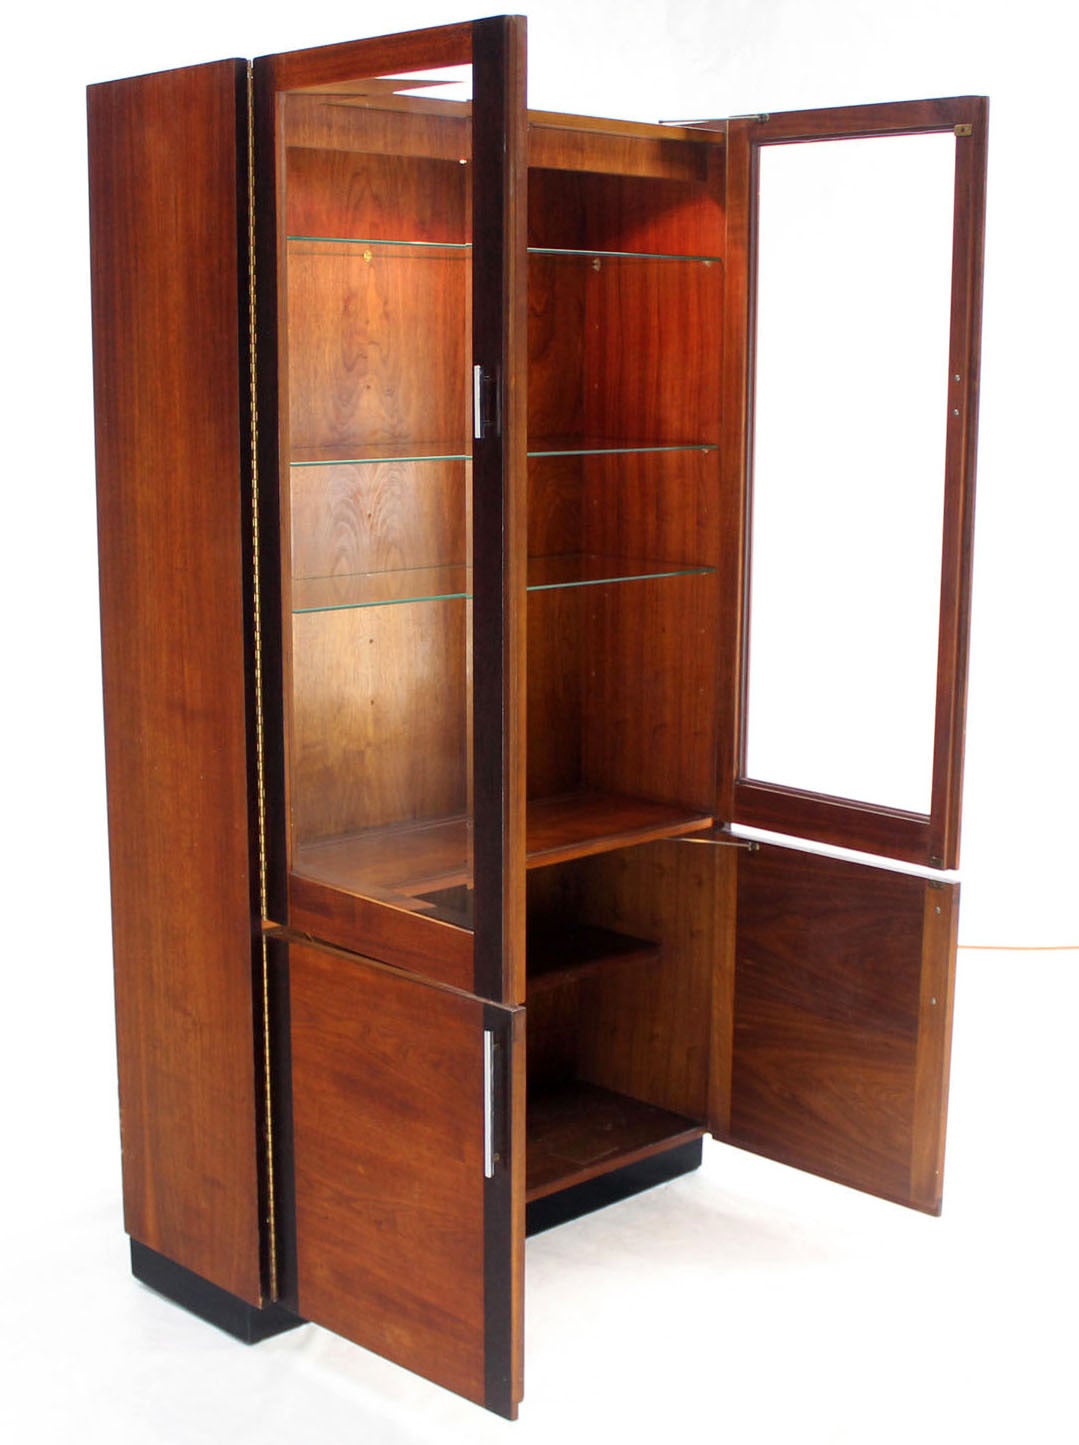 Walnut and Rosewood Modern Vitrine Display Cabinet in the Baughman Style